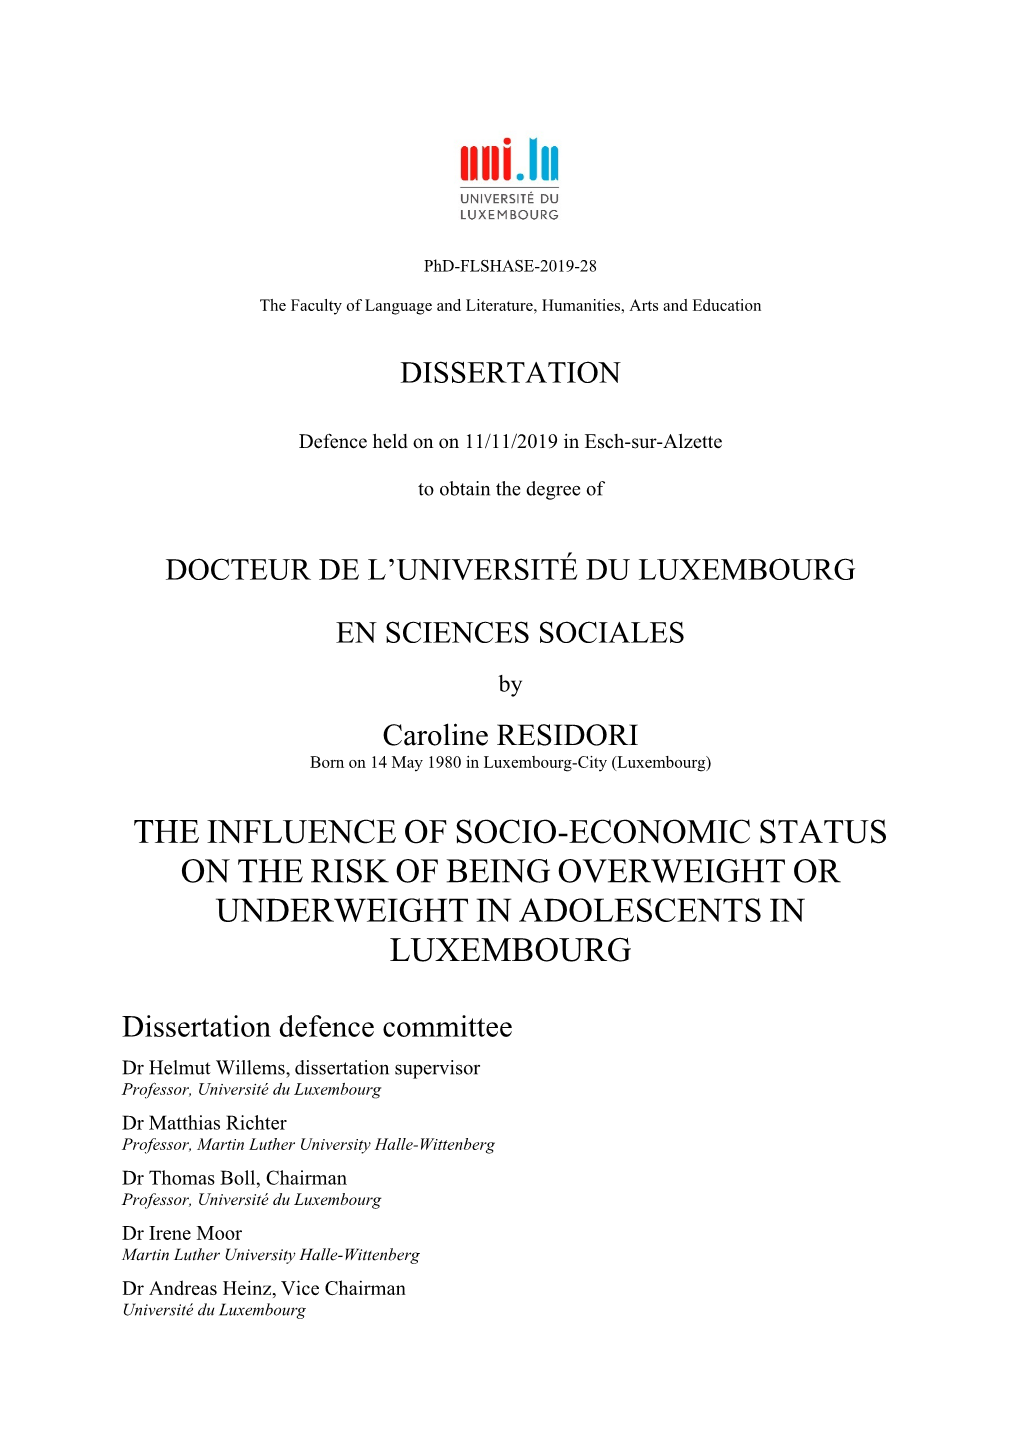 The Influence of Socio-Economic Status on the Risk of Being Overweight Or Underweight in Adolescents in Luxembourg